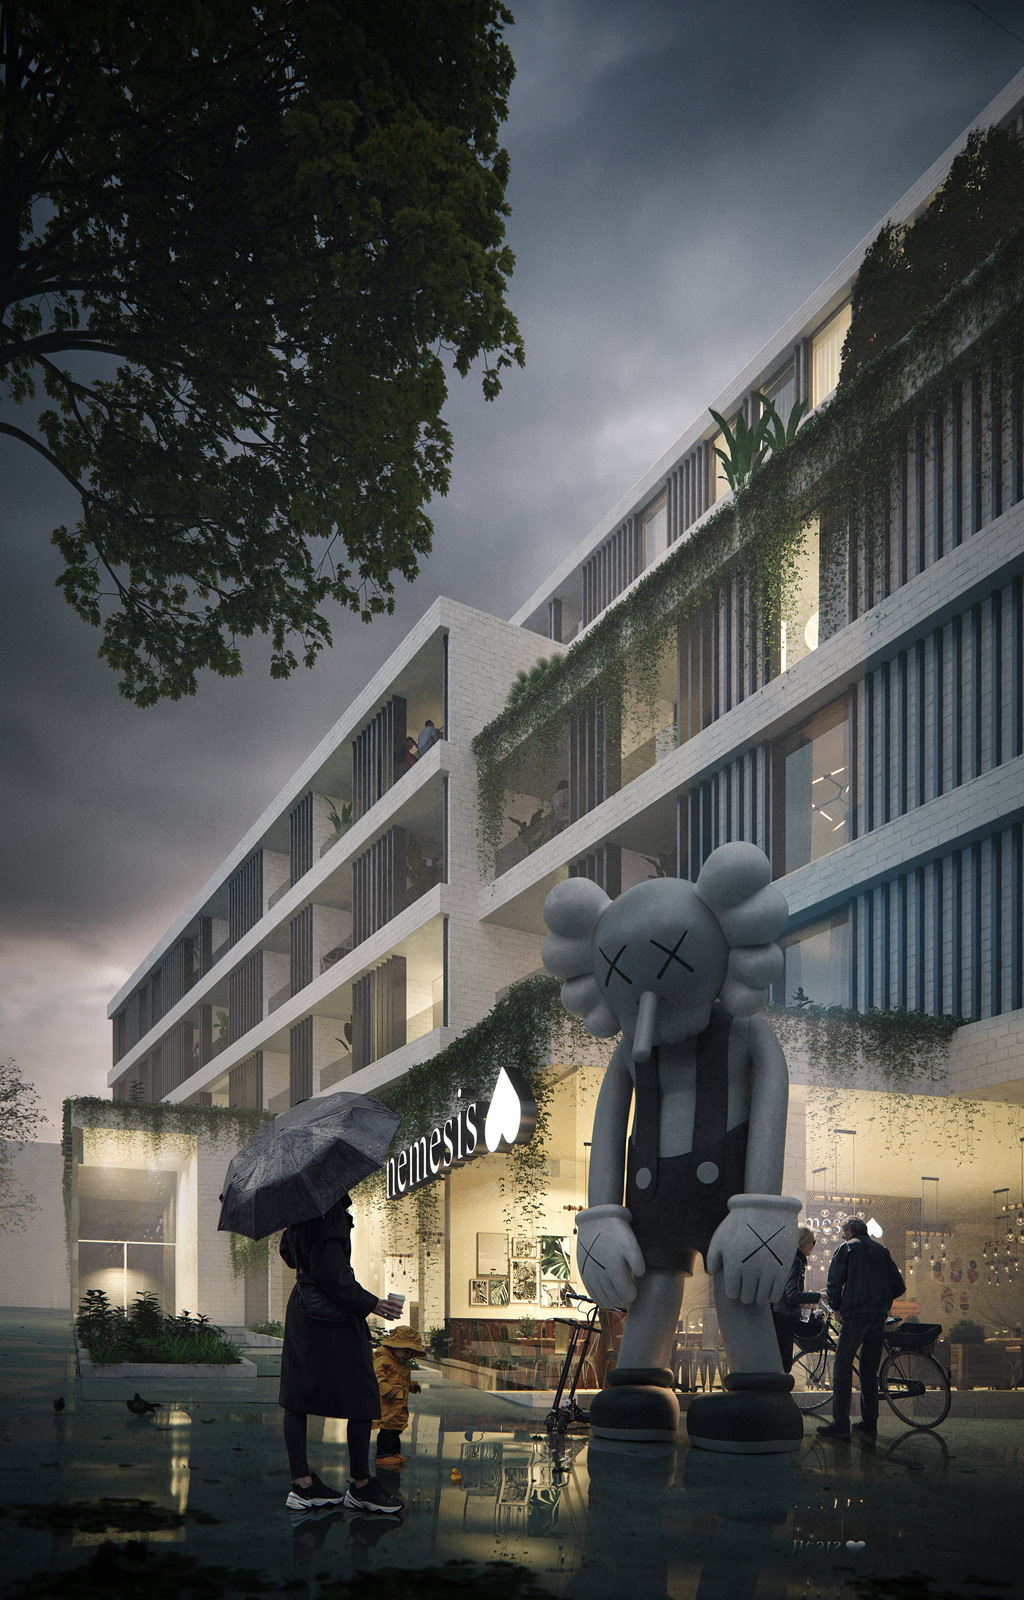 3D exterior rendering of a luxurious residential building tower in Vancouver, visualized from human-level during rainy weather, the frontal shot features a woman with a child in a rain poncho, a cafe, and a KAWS sculpture